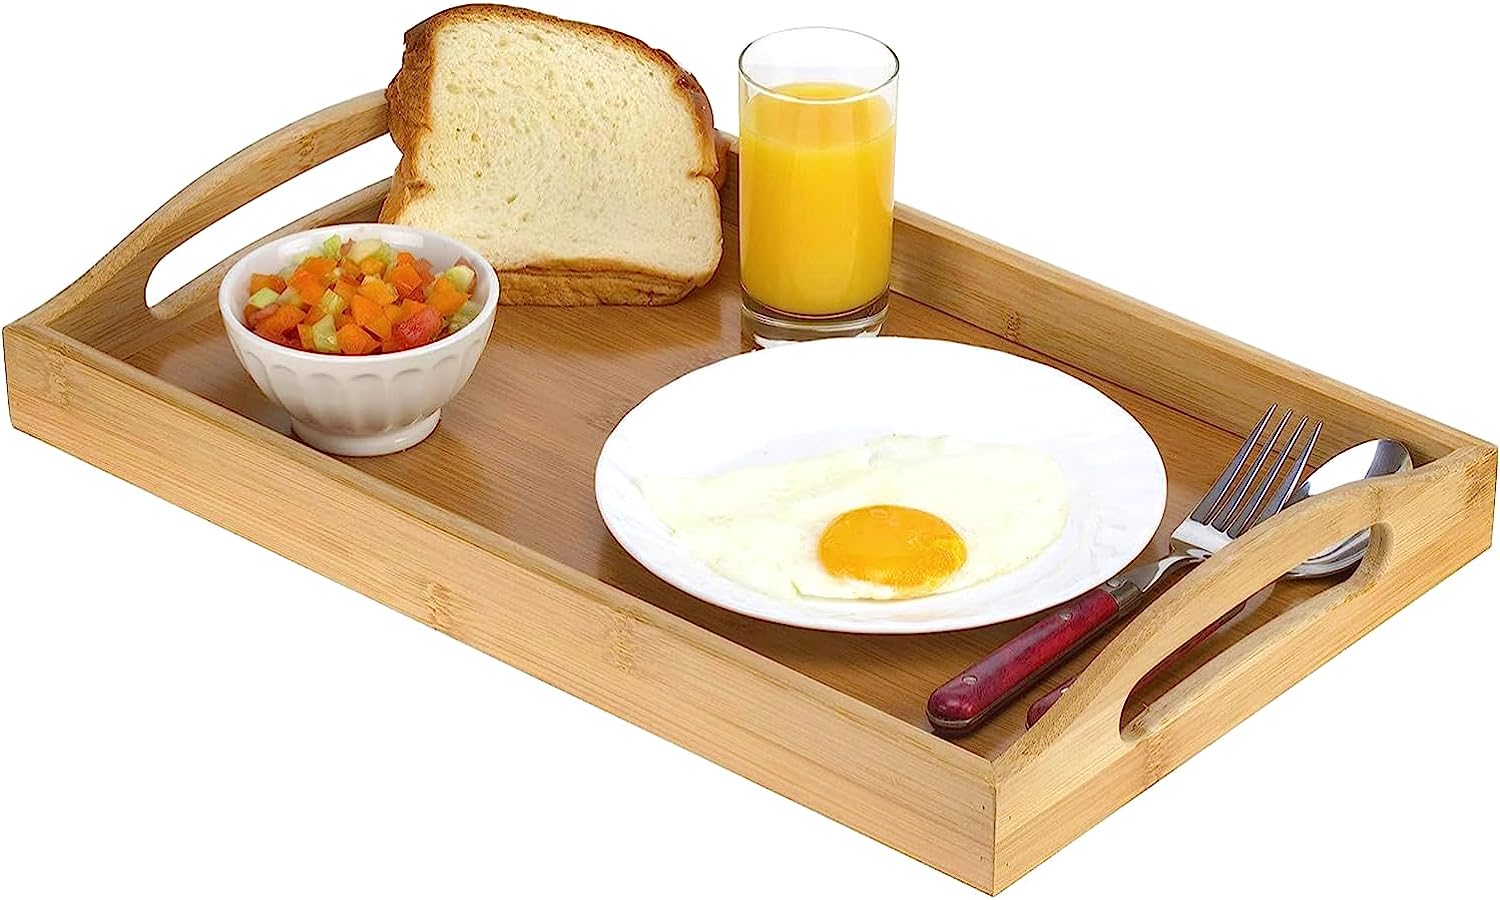 Bamboo Breakfast Tray Wooden Trays for Eating, Working, Storing, Used in Bedroom, Kitchen, Living Room, Bathroom, Hospital and Outdoors